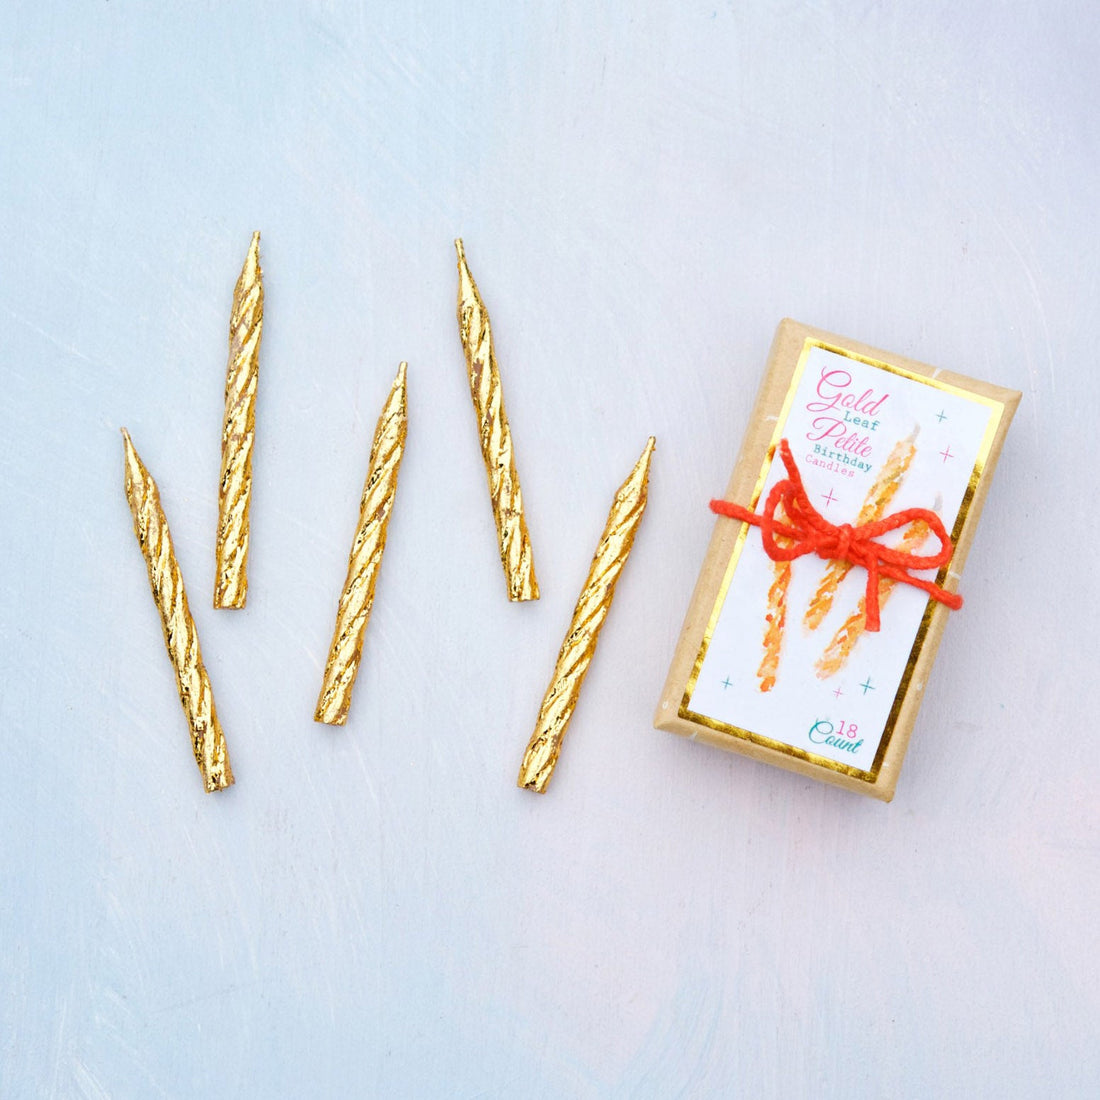 A set of Glitterville Gold Petite Party Candles, Boxed Set of 18 for celebration and a gift box on a table.